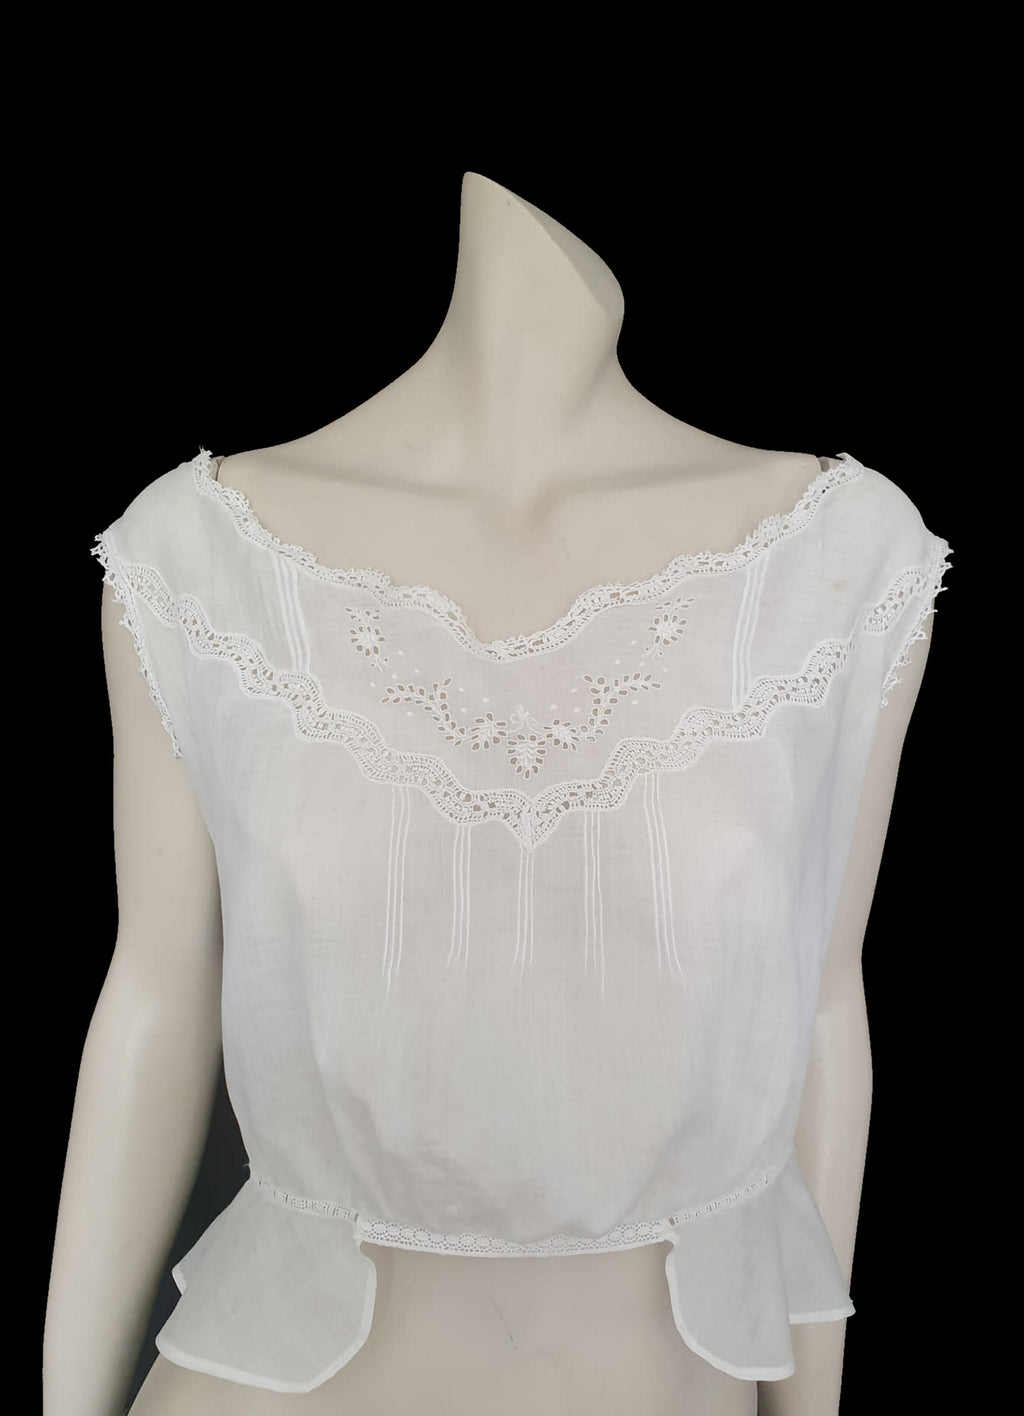 edwardian victorian antique camisole corset cover blouse with embroidery lace and pin tucks Medium